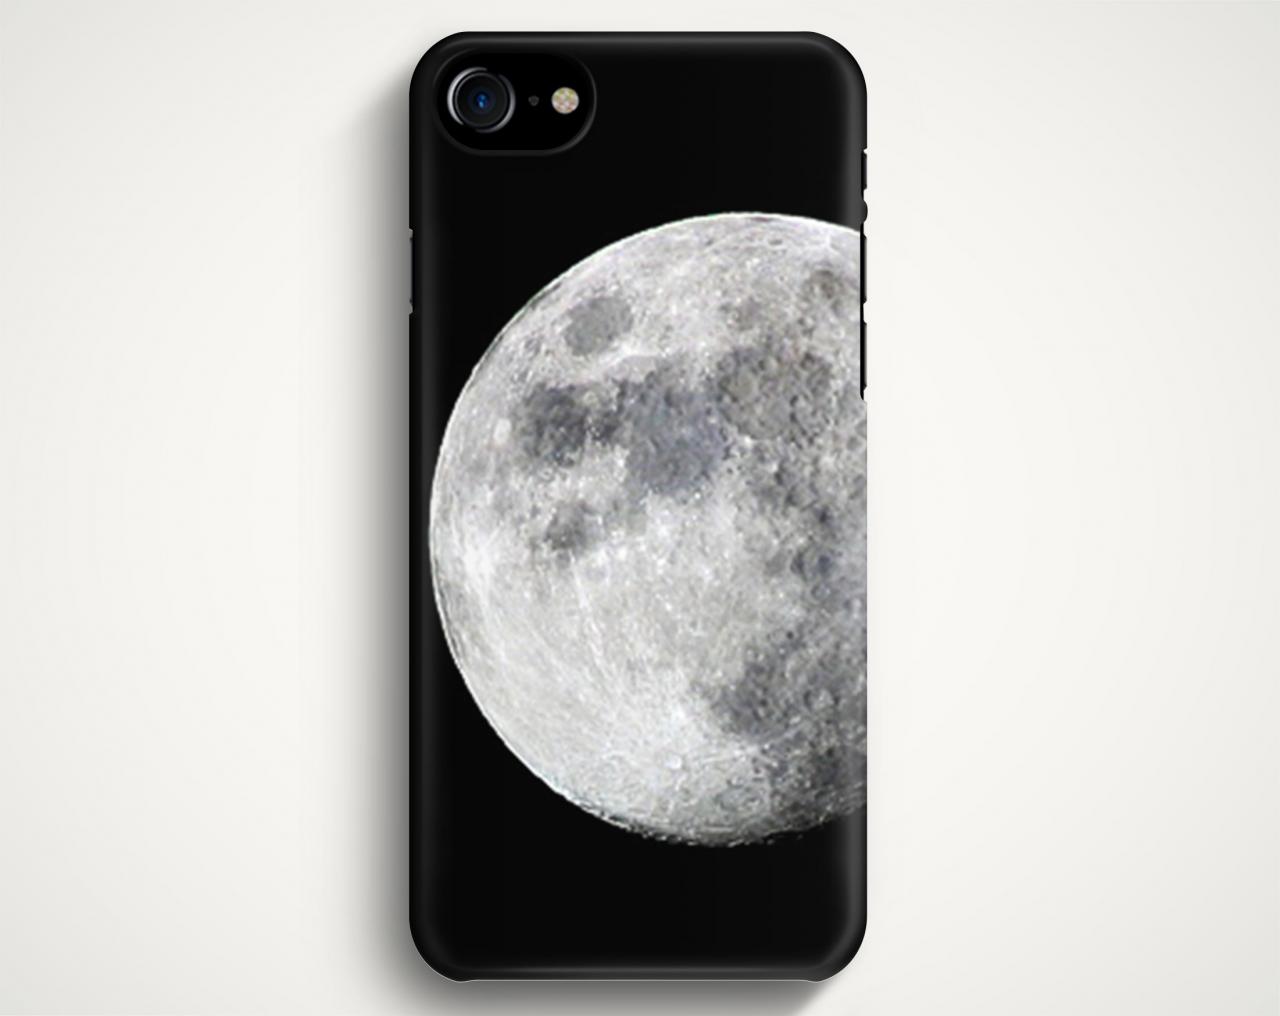 Moon Case For Iphone 7 Iphone 7 Plus Samsung Galaxy S8 Galaxy S7 Galaxy A3 Galaxy A5 Galaxy A7 Lg G6 Lg G5 Htc 10